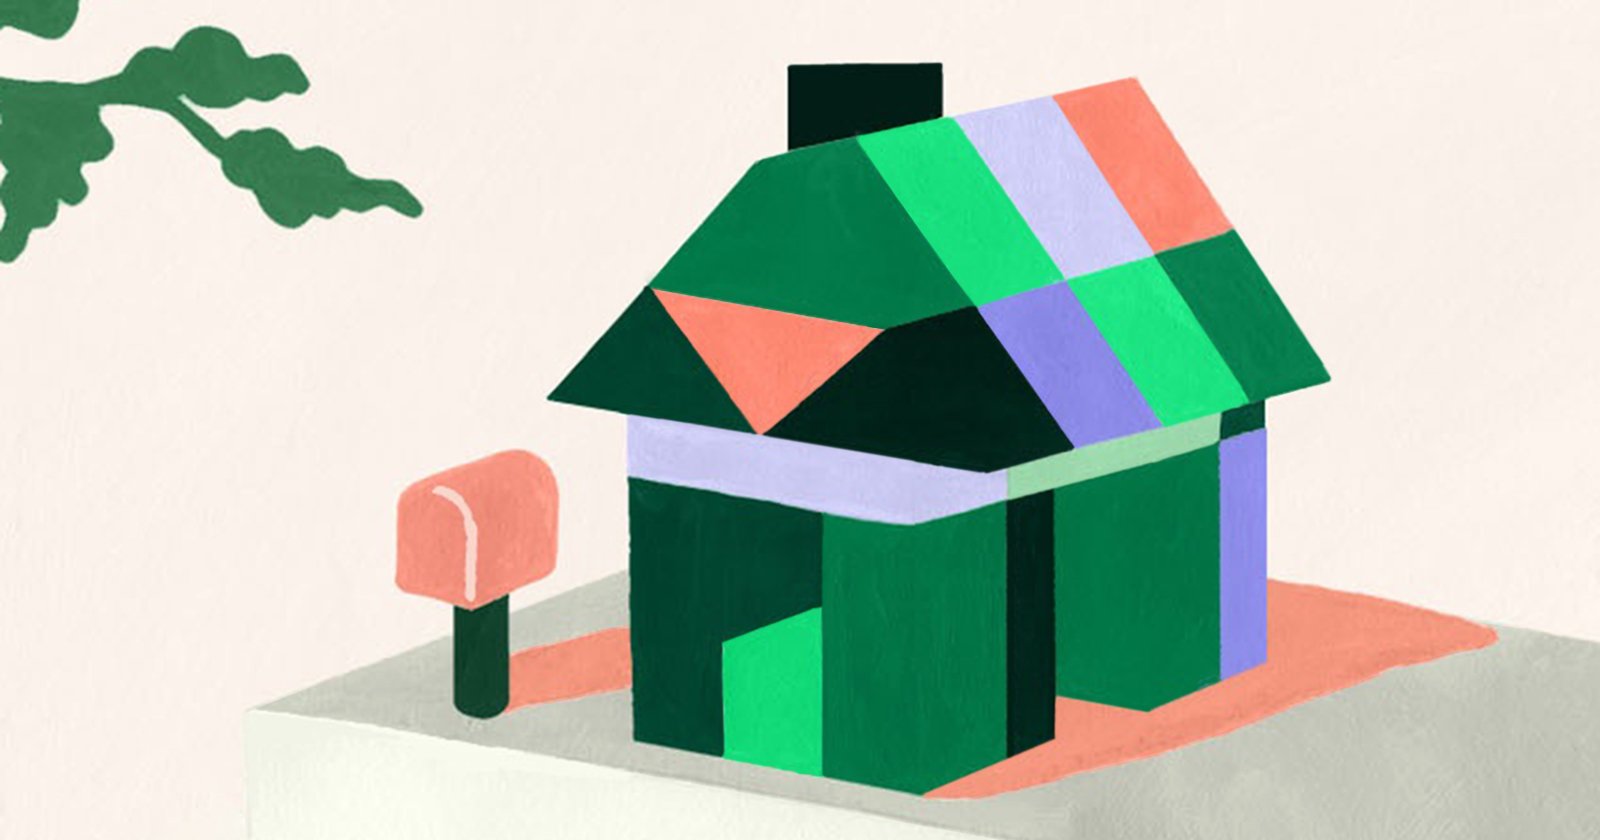 Illustrated image of a house built out of purple, green, and pink color blocks with a mailbox in front